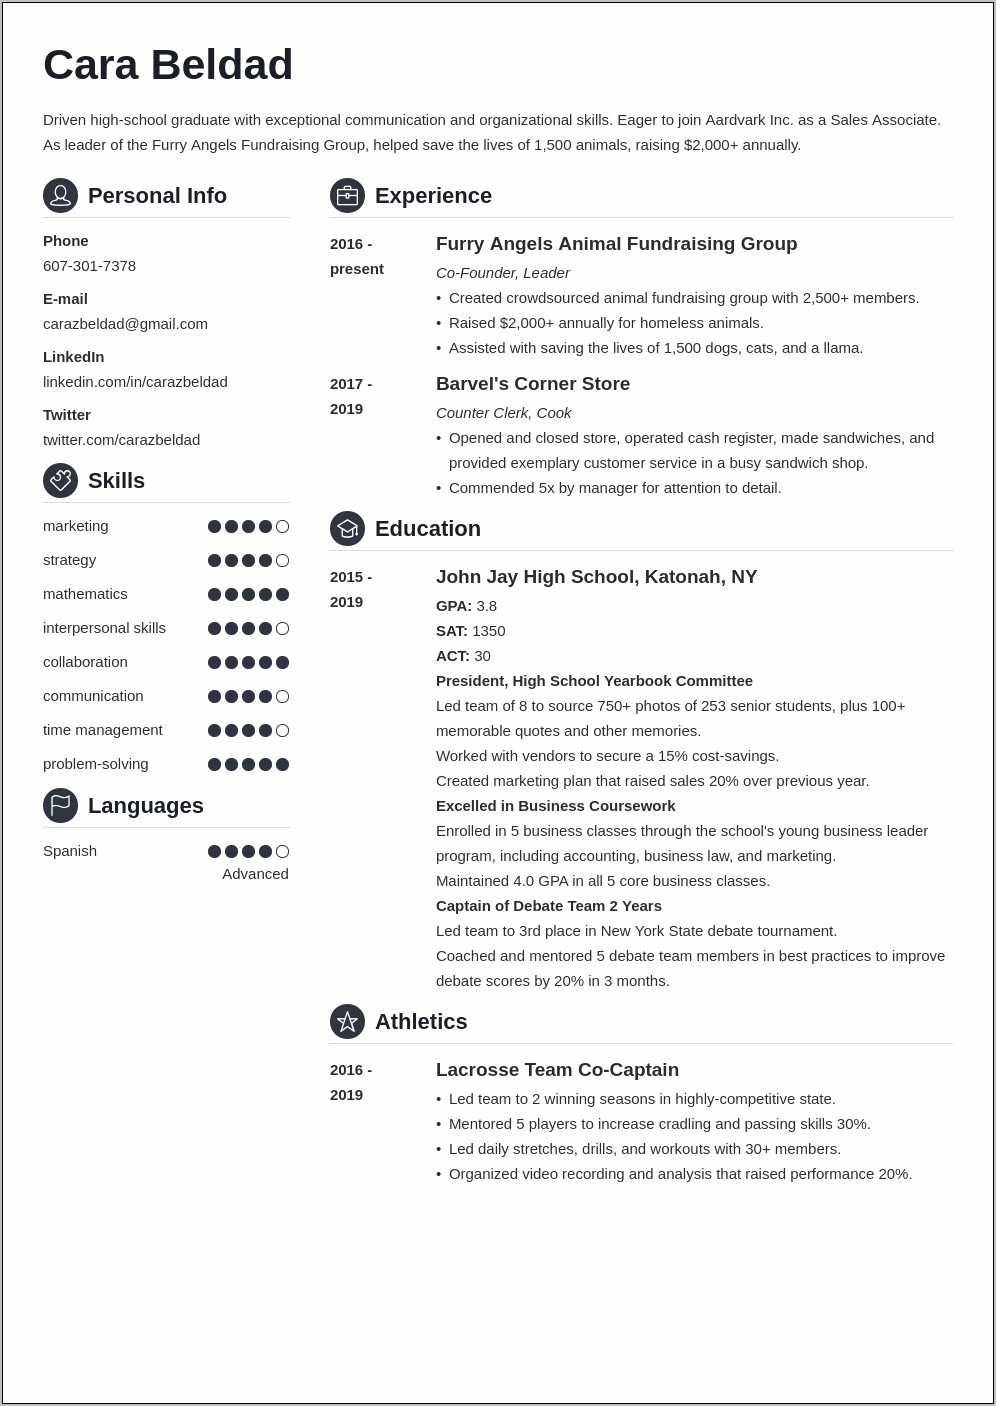 A High School Student Resume Template